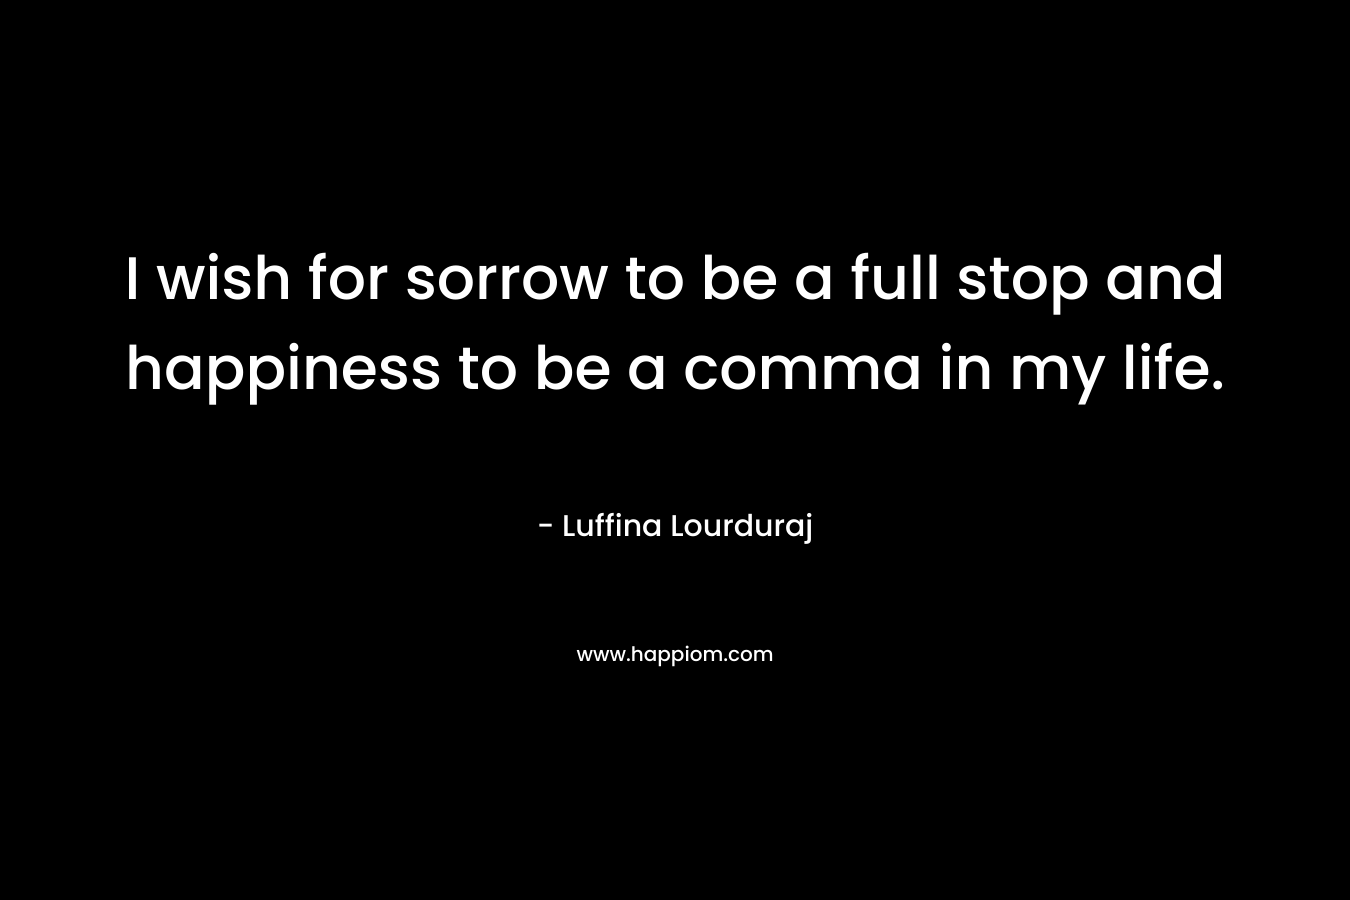 I wish for sorrow to be a full stop and happiness to be a comma in my life.